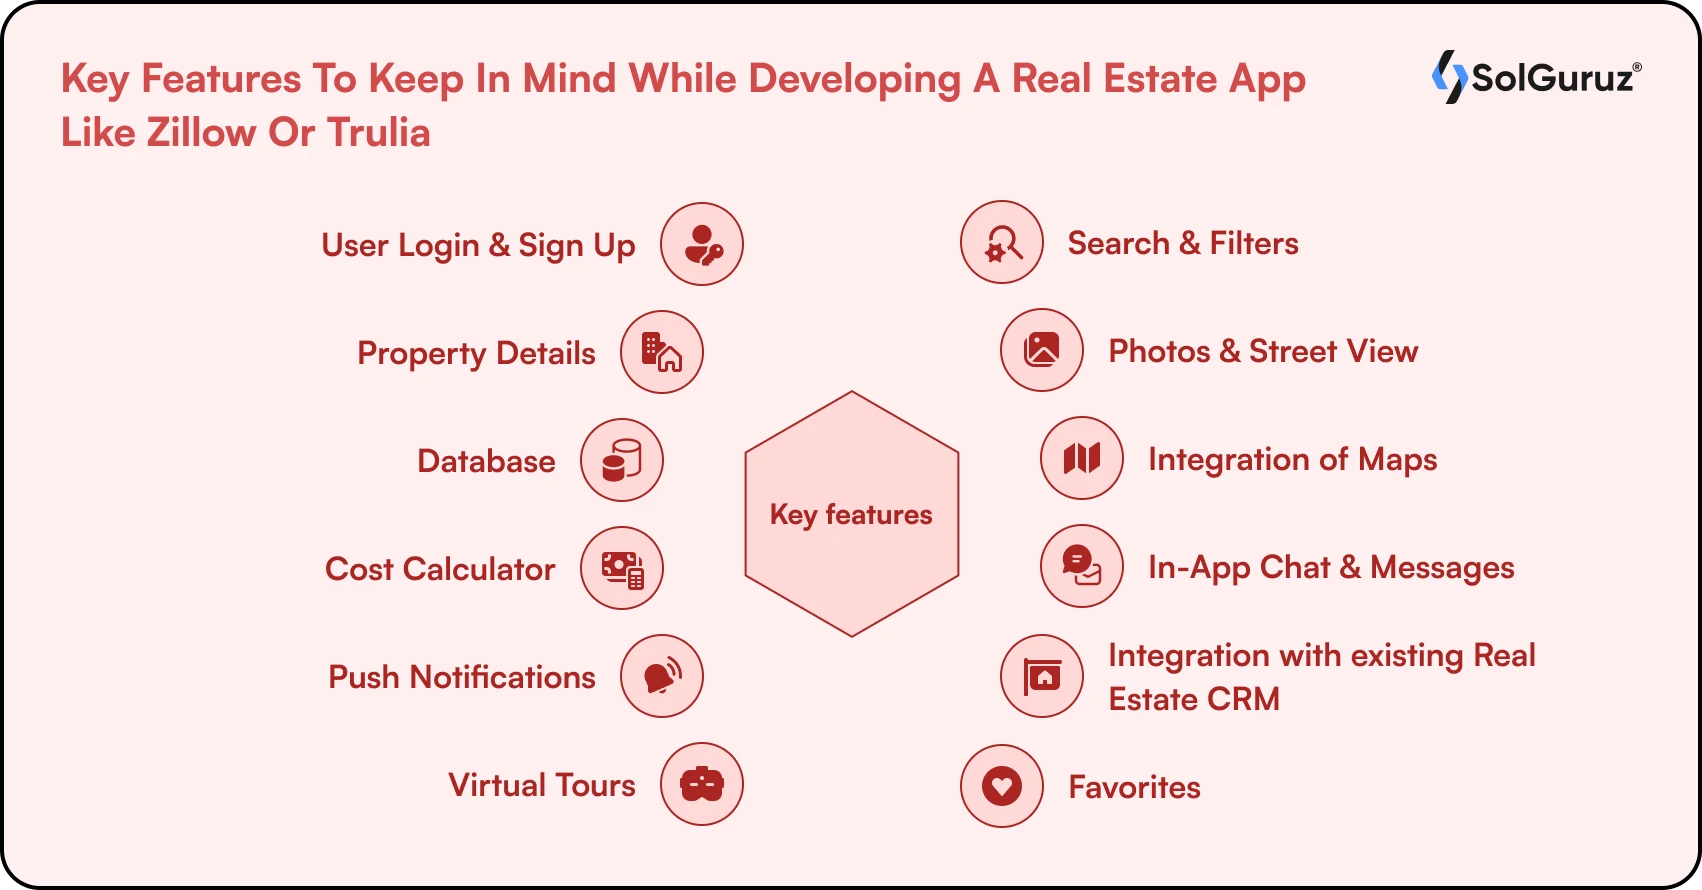 What Key Features To Keep In Mind While Developing A Real Estate App Like Zillow Or Trulia